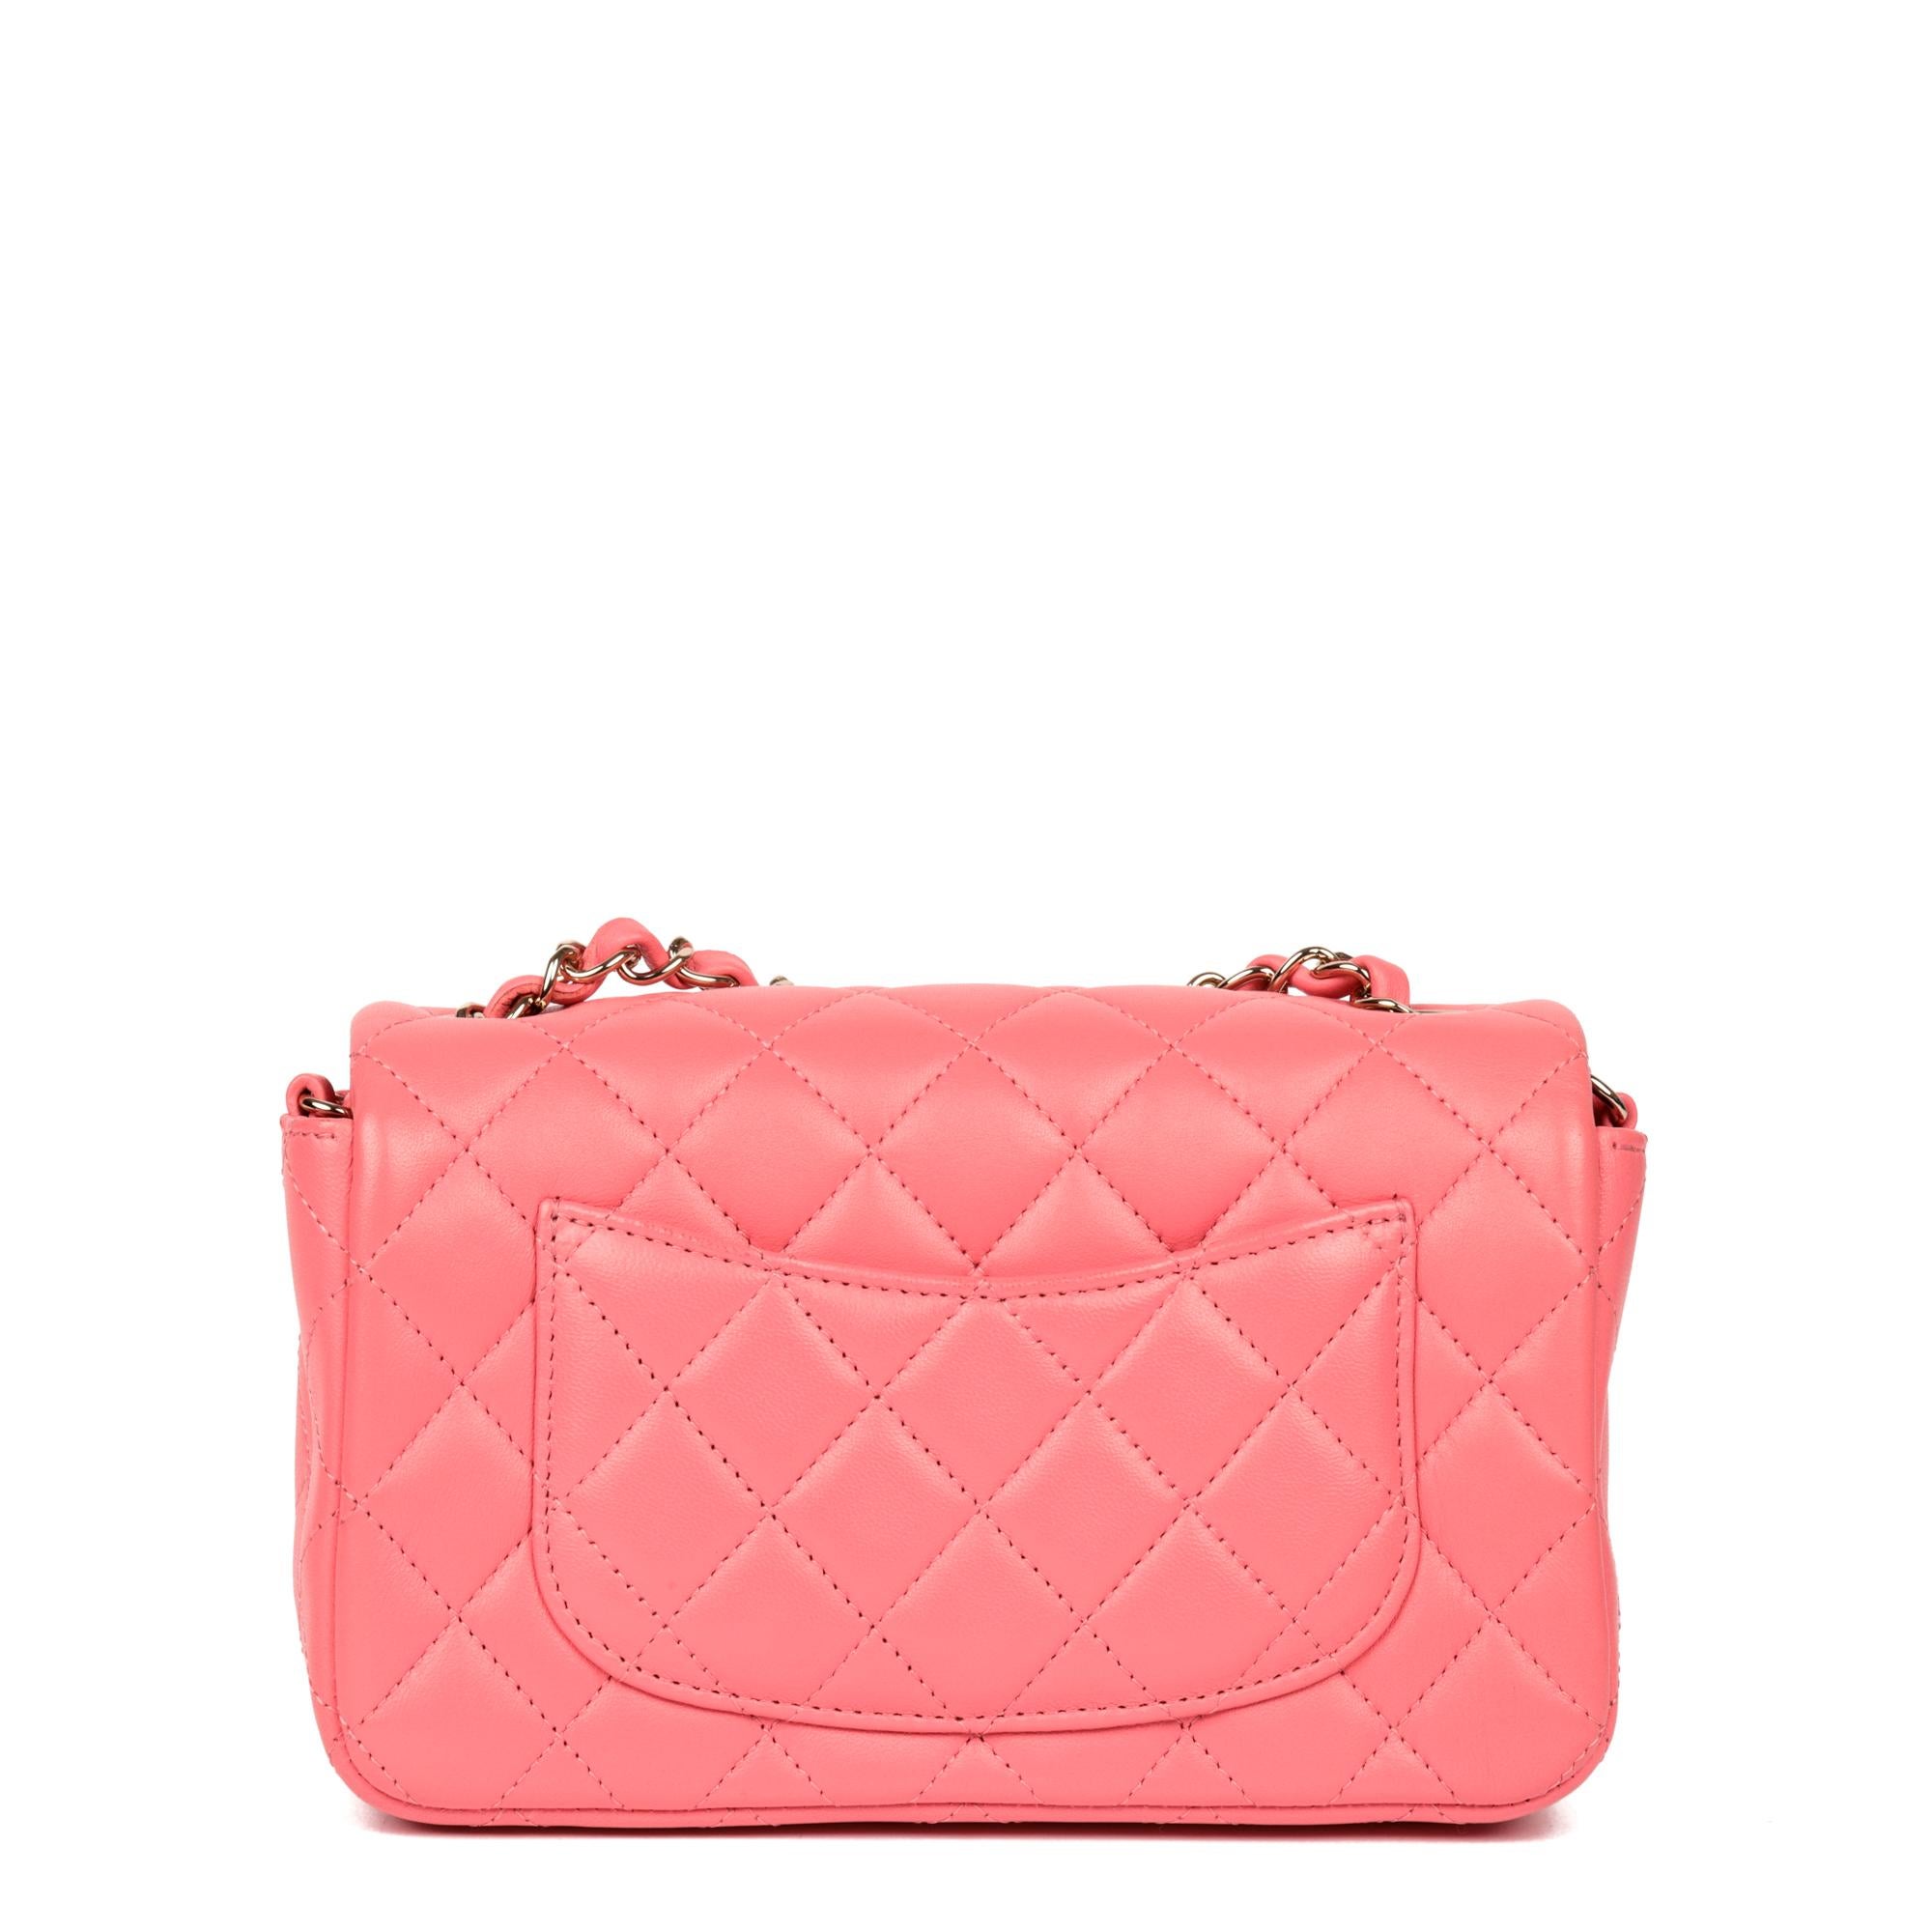 Chanel Pink Quilted Lambskin Rectangular Mini Flap Bag For Sale 1